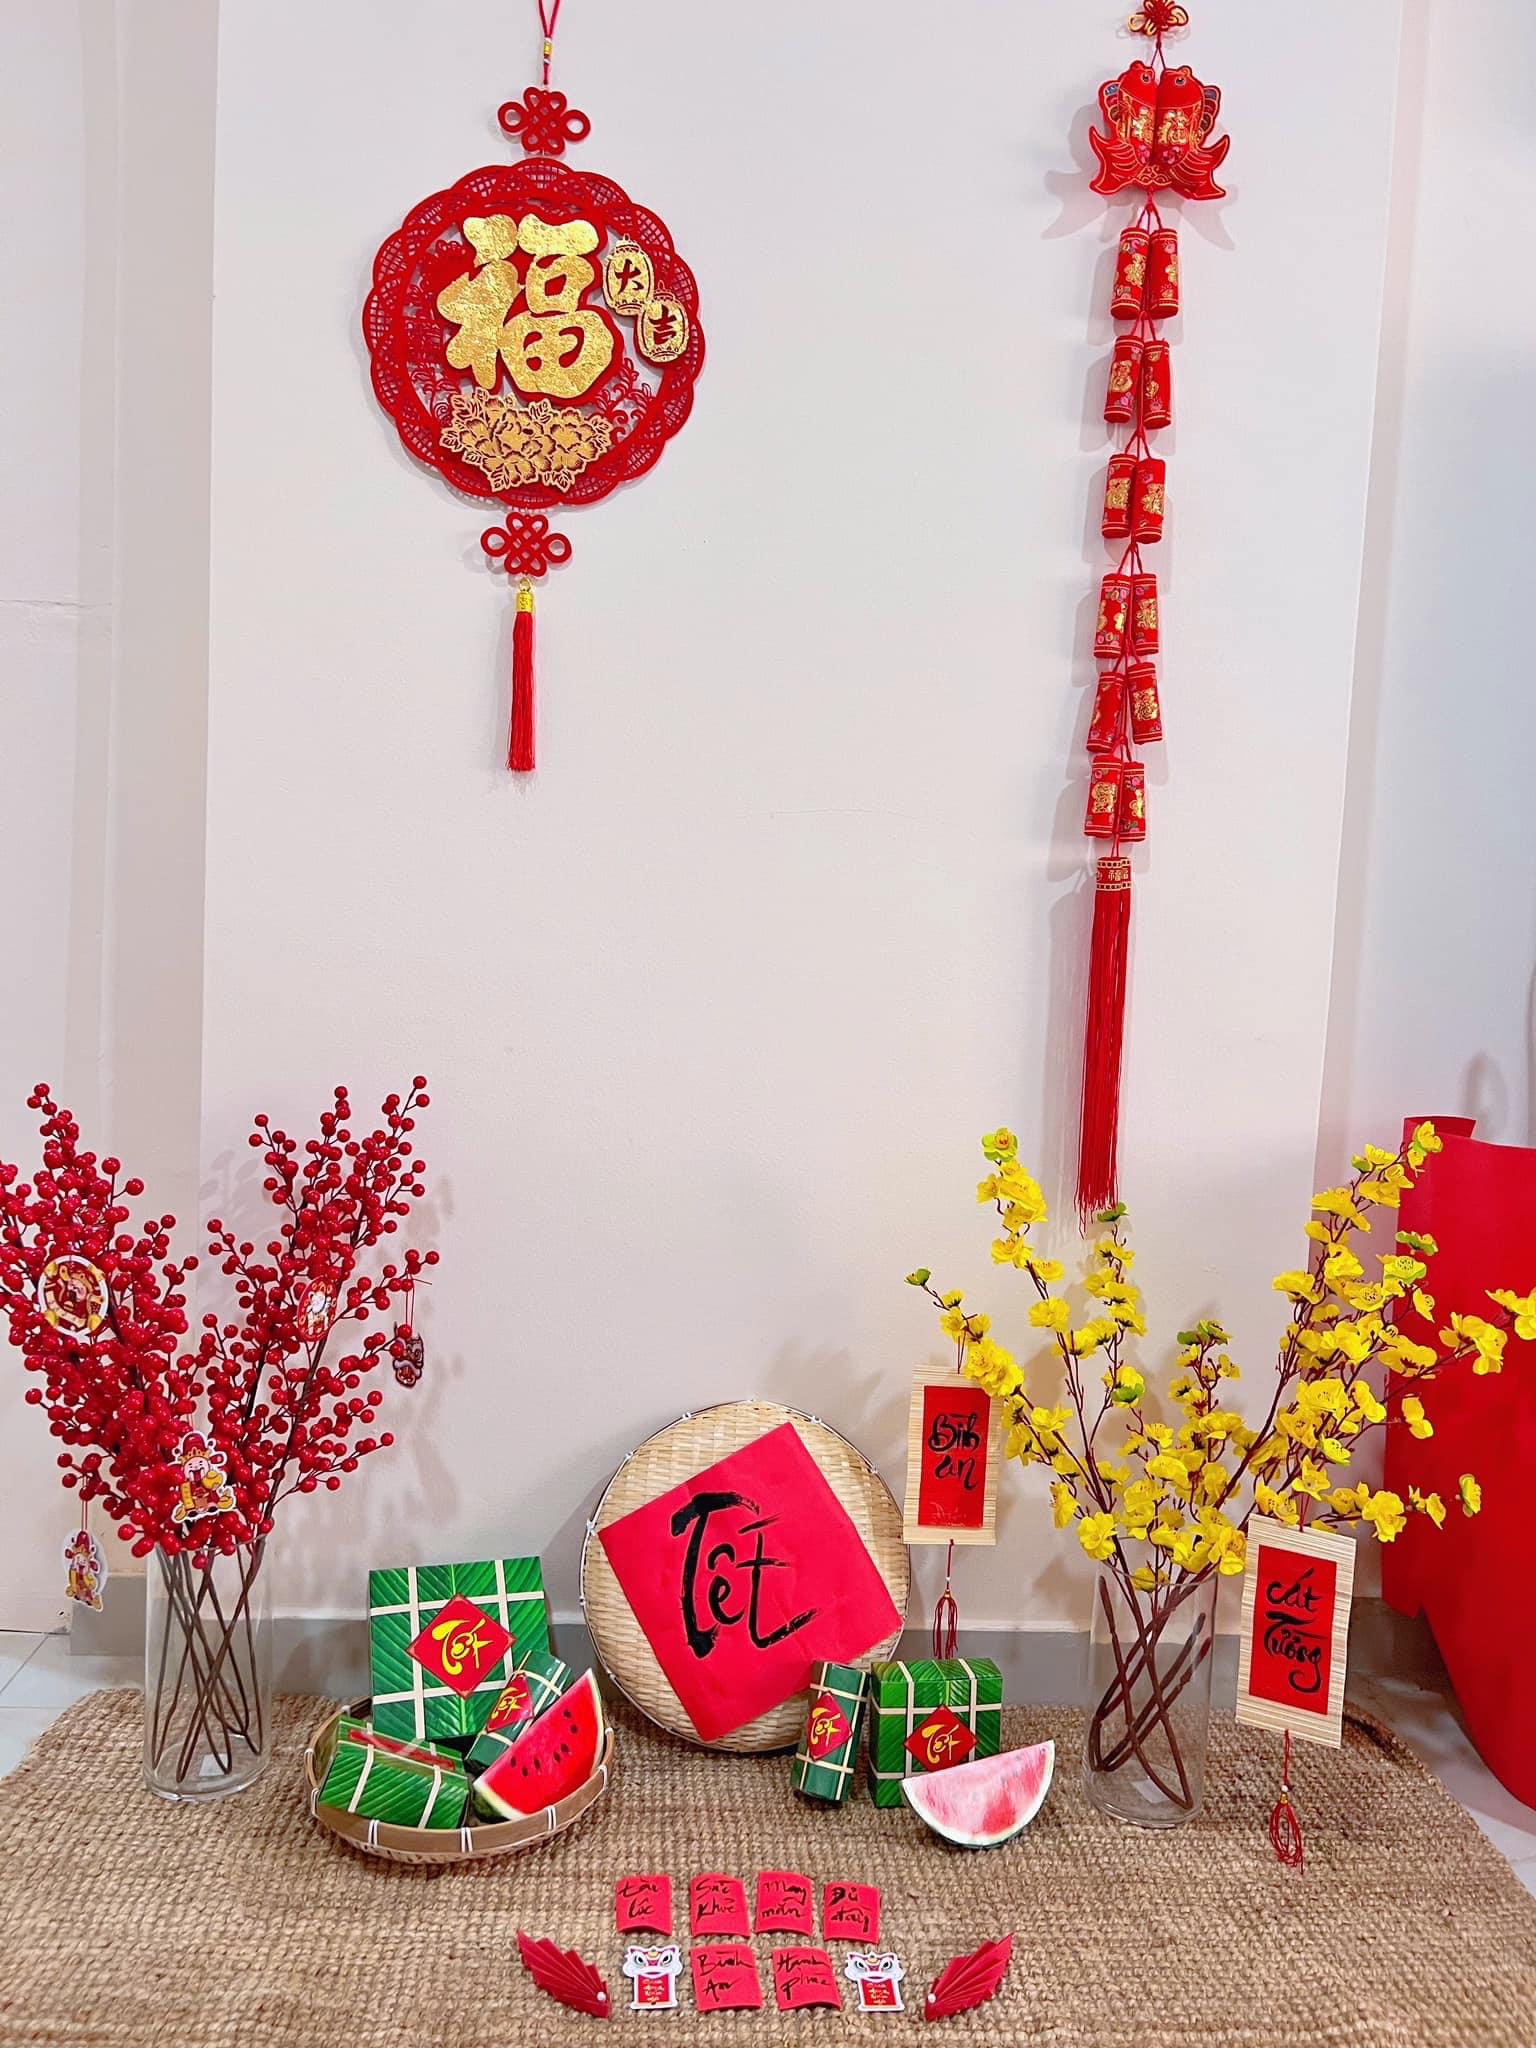 Le Hoang Phuong Quynh’s house in Dubai is festooned with Tet decorations. Photo: Supplied